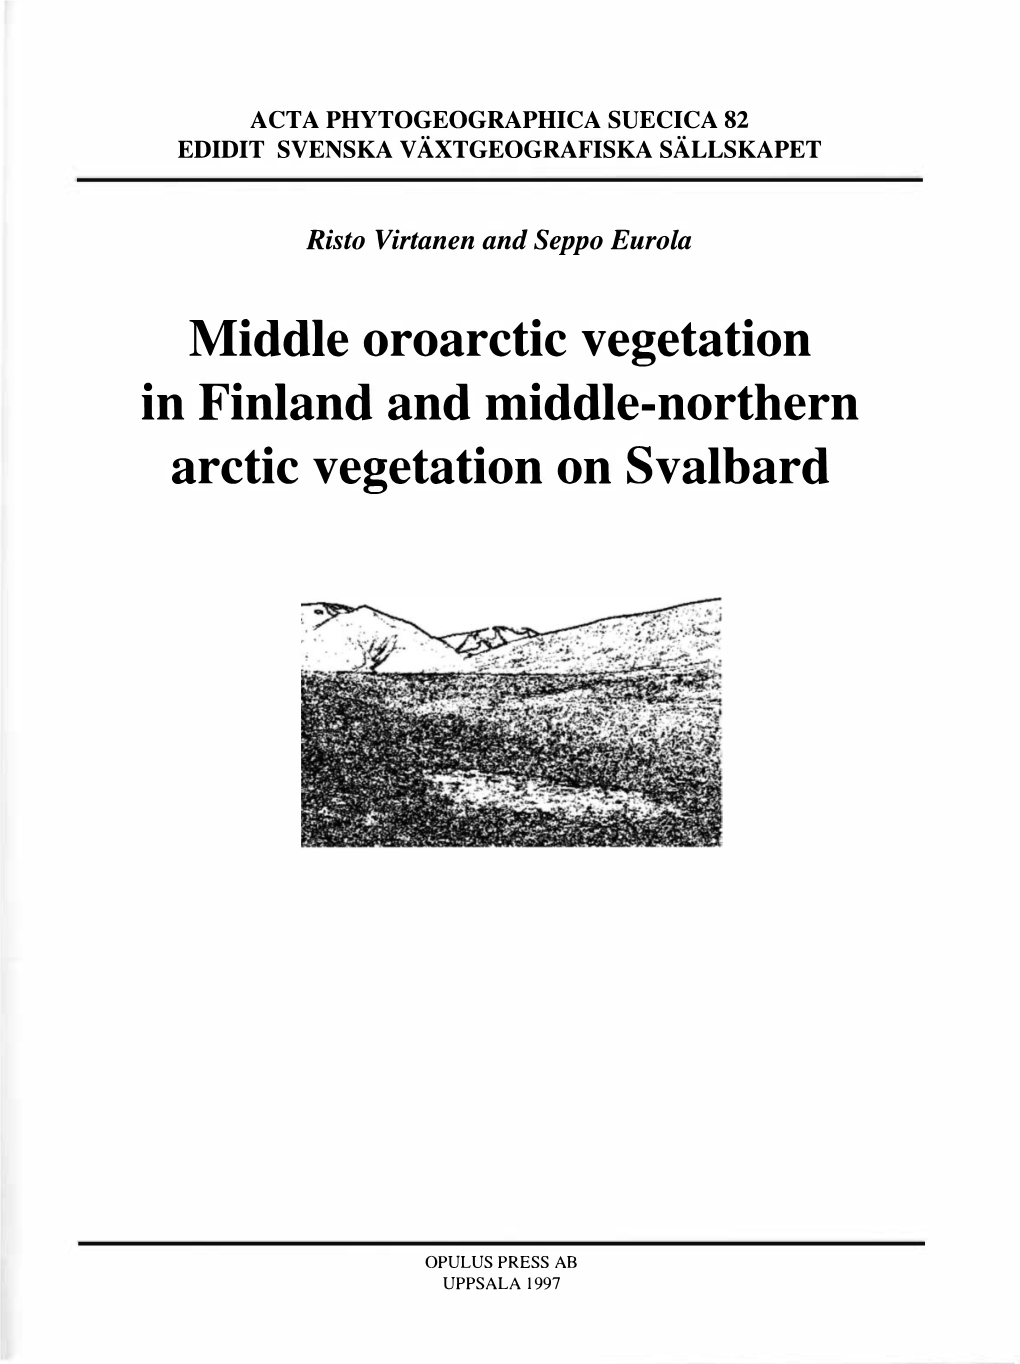 Middle Oroarctic Vegetation in Finland and Middle-Northern Arctic Vegetation on Svalbard